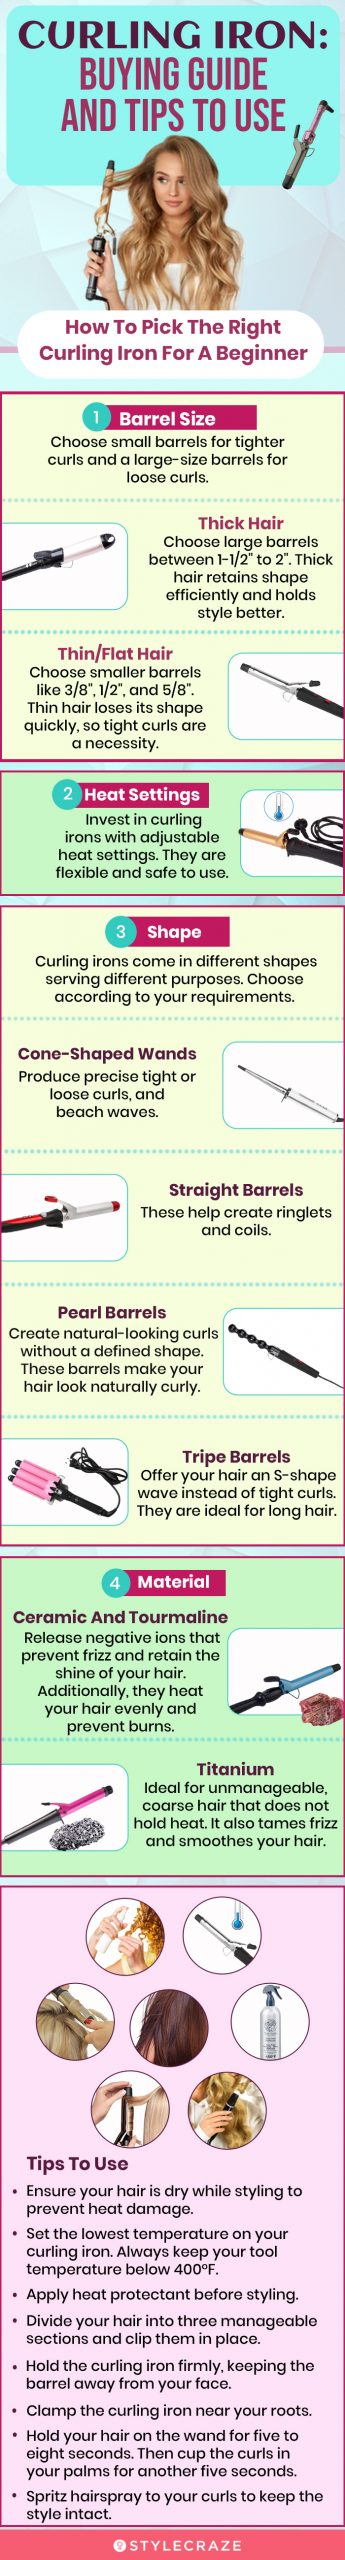 Curling Iron: Buying Guide And Tips To Use (infographic)